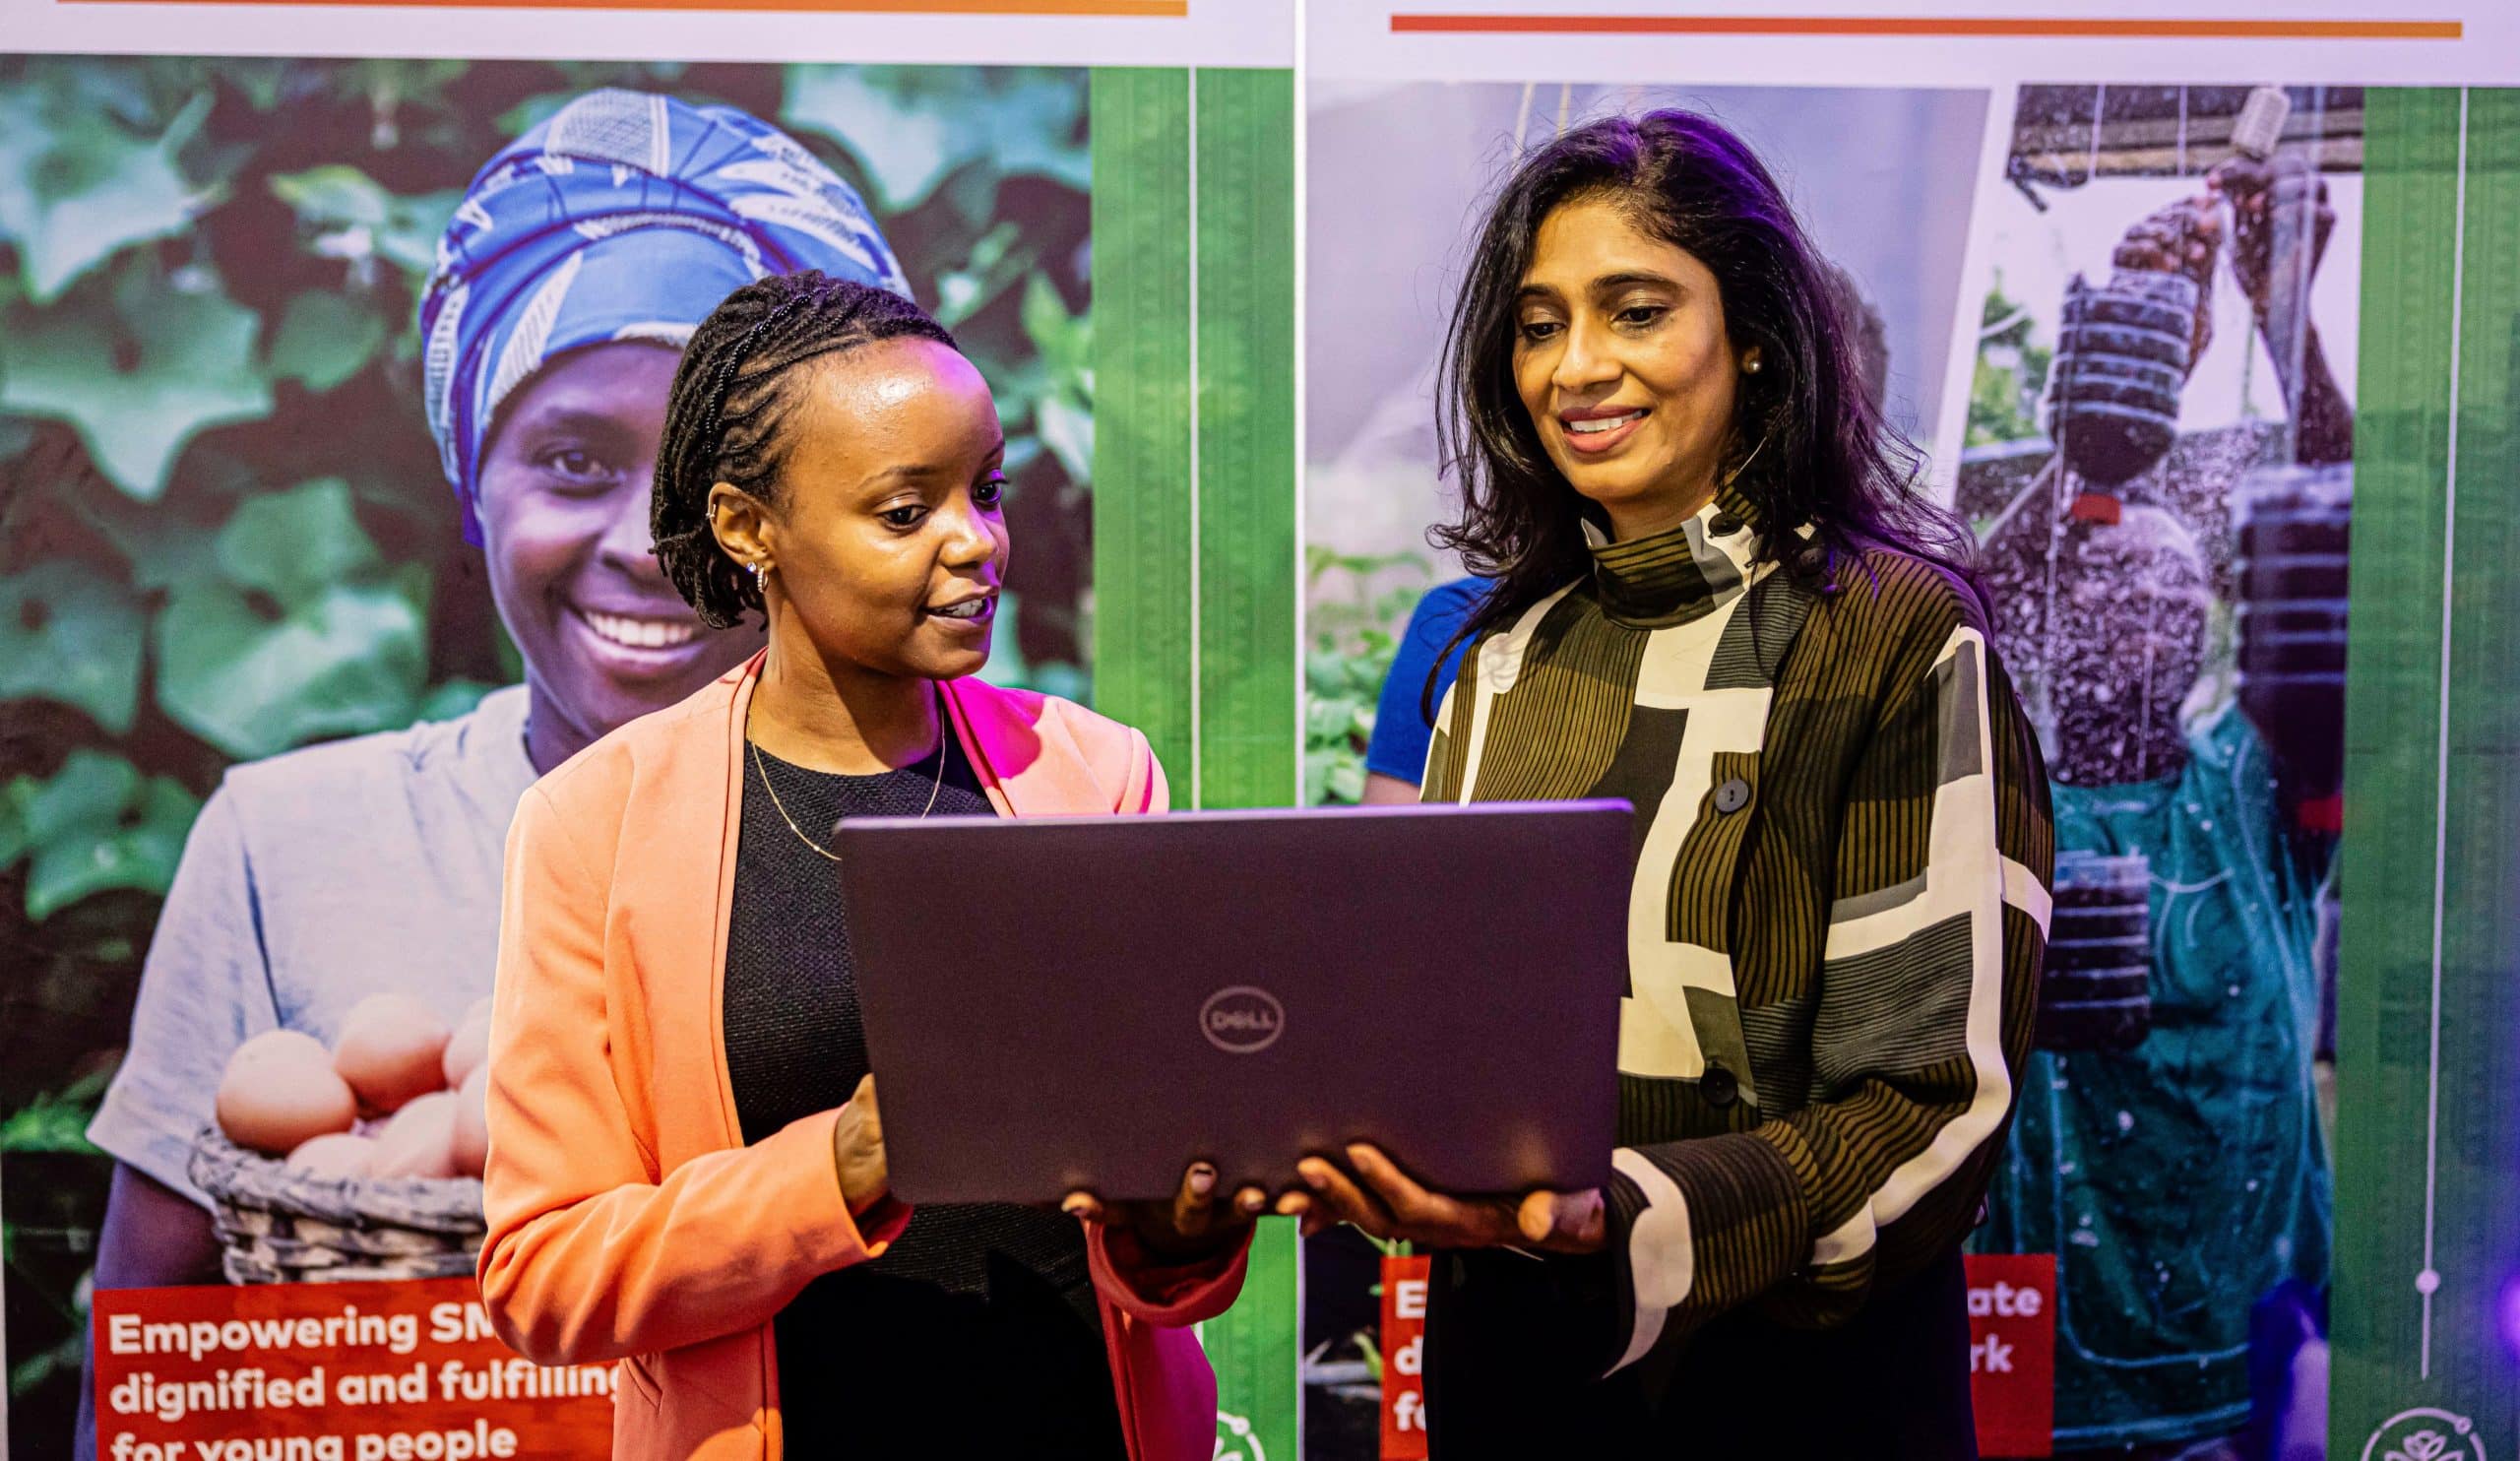 Smita Sanghrajka(r) speaks with a participant during the Agribusiness Challenge Fund Event, Zen Garden, Nairobi, Kenya. 9 April 2024.The Mastercard Foundation Fund for Resilience and Prosperity is holding a series of workshop events throughout the African continent to discuss the financial instruments available for the development of innovation and technology in the agriculture sector. The Mastercard Foundation Fund for Resilience and Prosperity is a seven-year, US$ 126 million Fund that aims to support Small and Medium-sized Enterprises (SMEs) across the agriculture, climate adaptation and digital economy sectors in 20 countries in Sub-Saharan Africa. The main objective of the Fund is to unlock enterprise growth and catalyze, scale-up and sustain the creation of dignified and fulfilling work opportunities for young women and men, young people with disabilities and refugee youth.